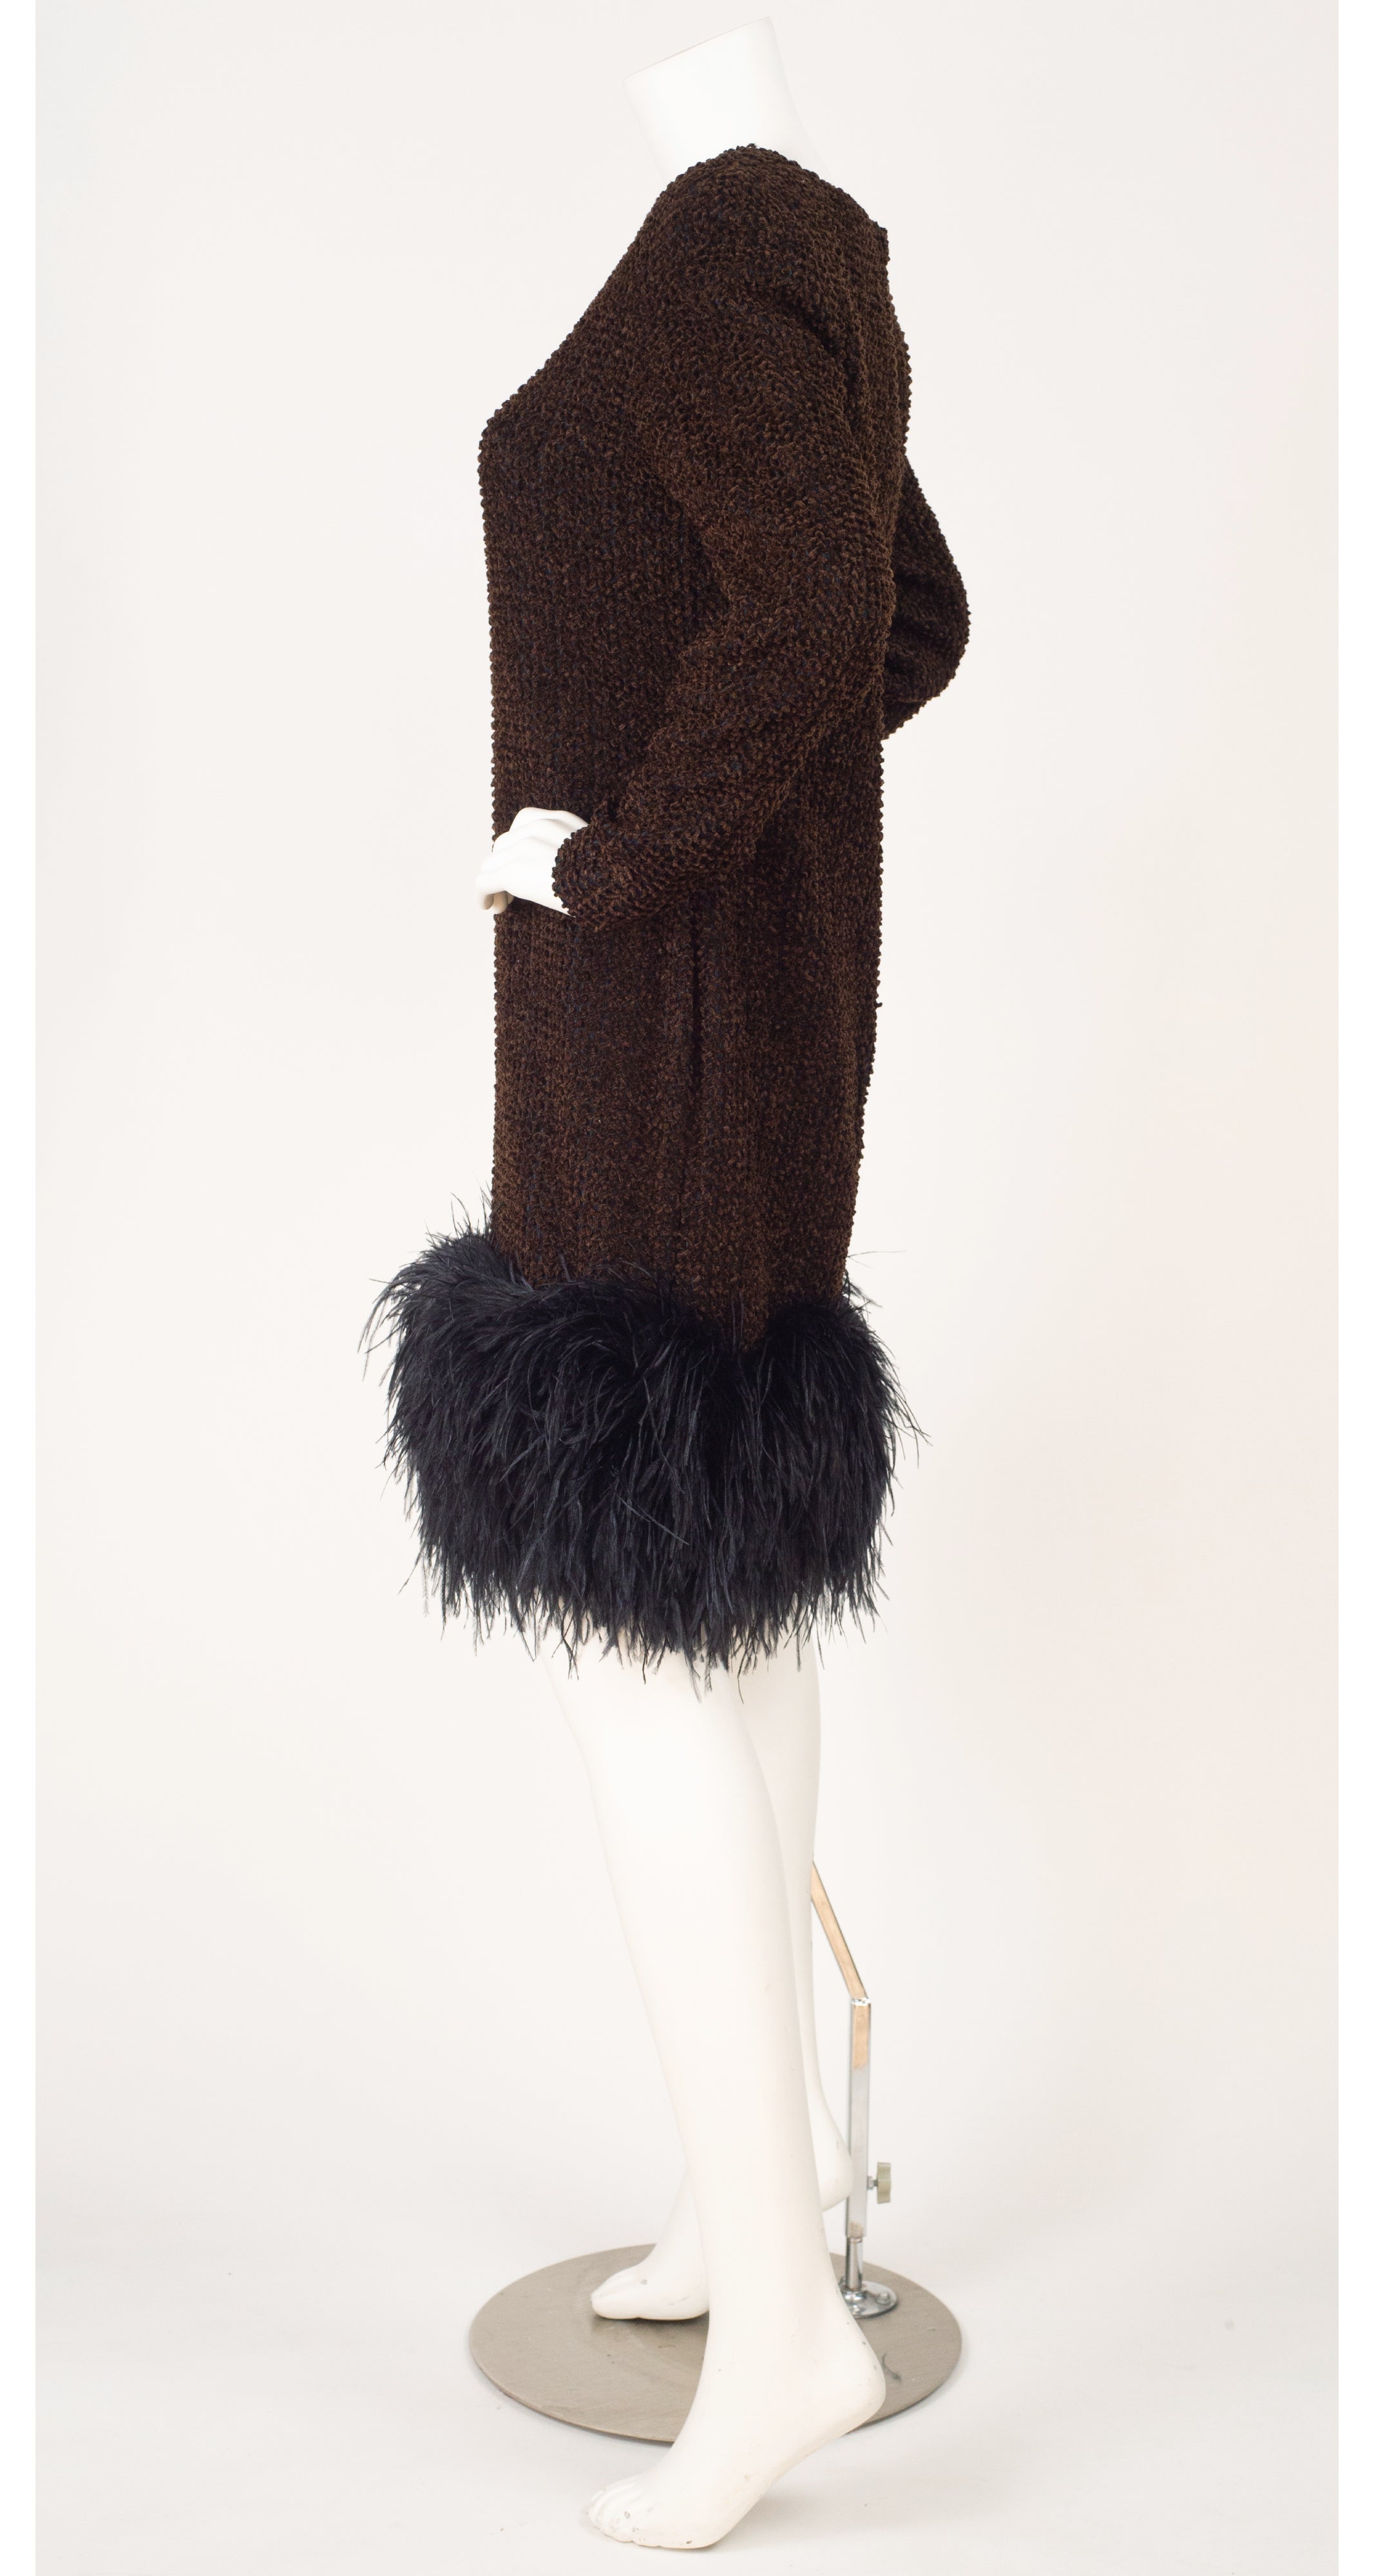 1990s Brown Chenille Ostrich Feather Trim Cocktail Dress